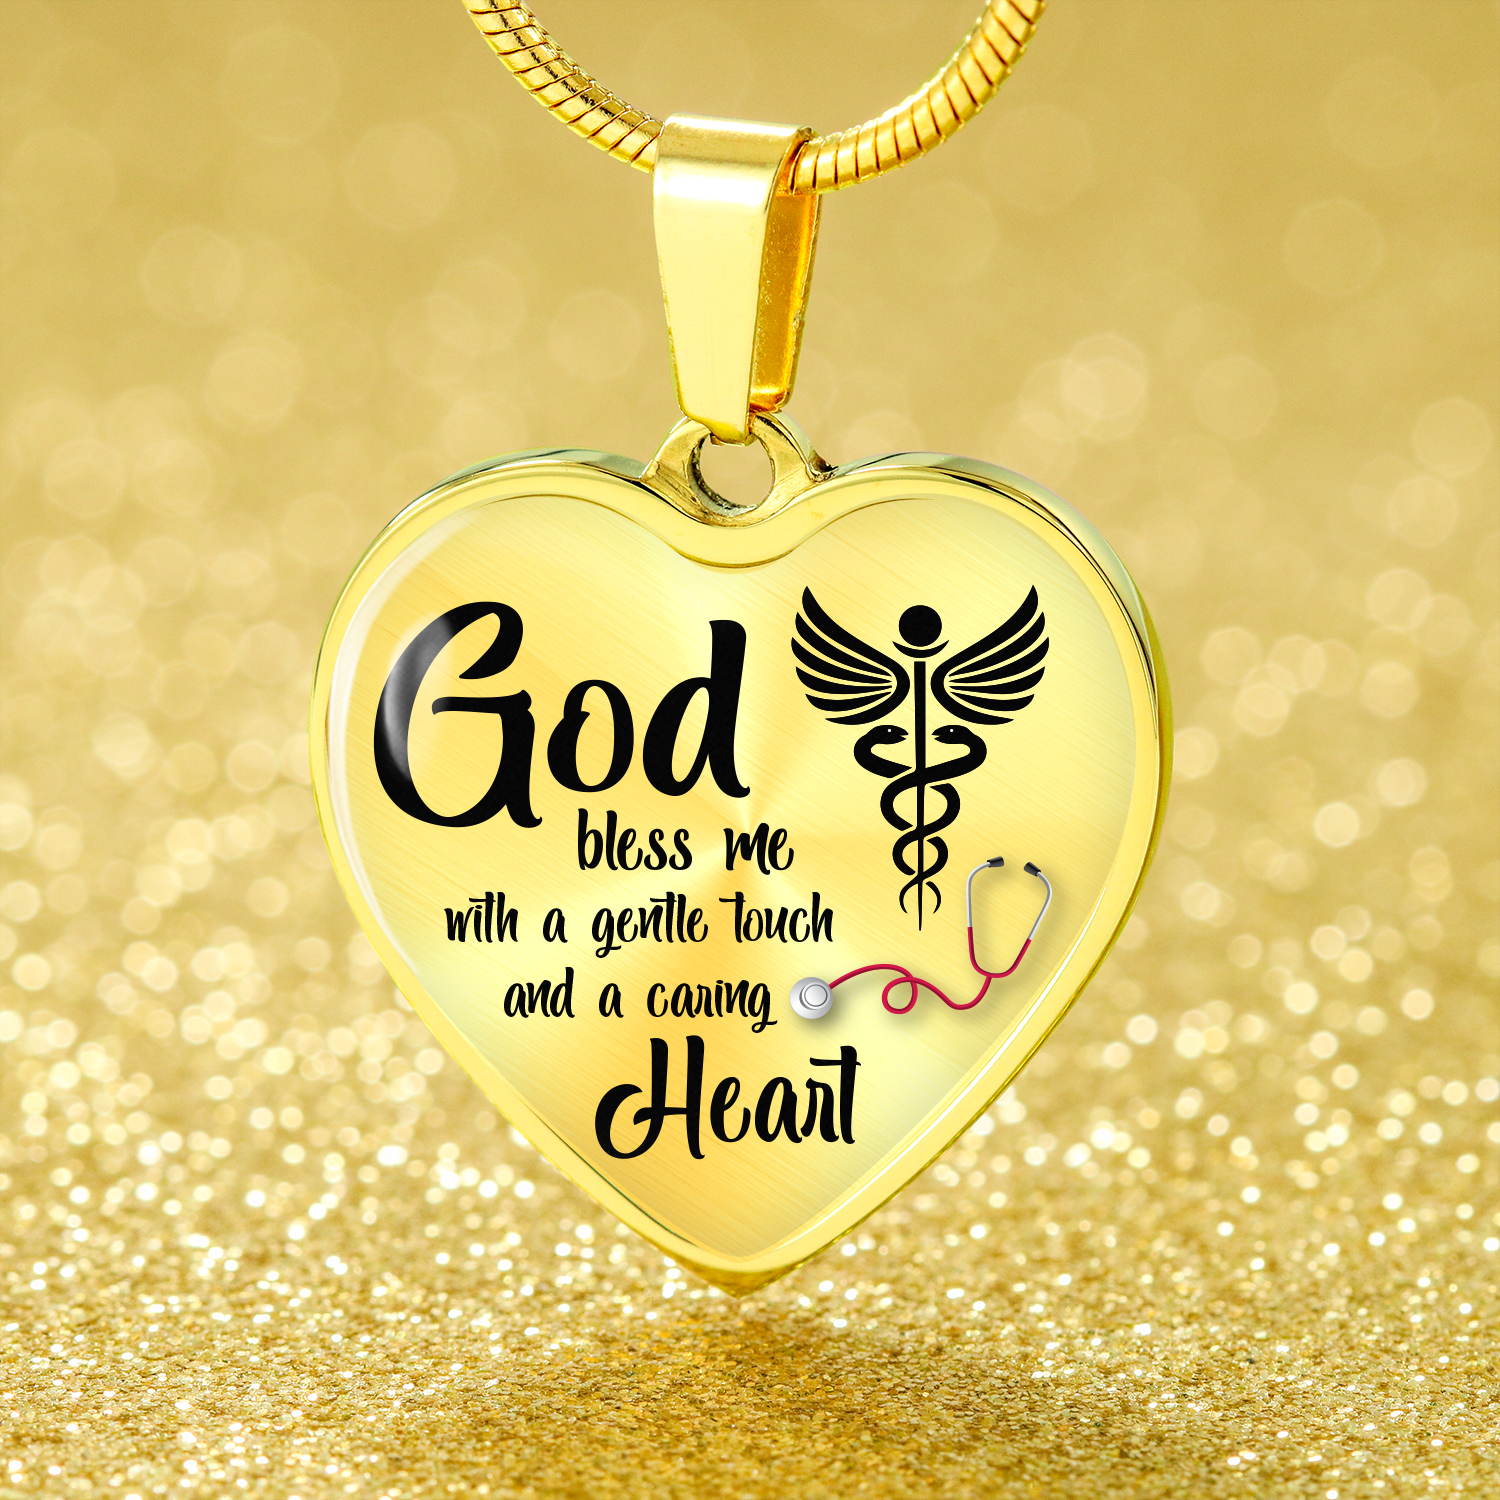 God Bless Me Nurse Gift Heart Pendant Stainless Steel or 18k Gold 18-22" - Express Your Love Gifts